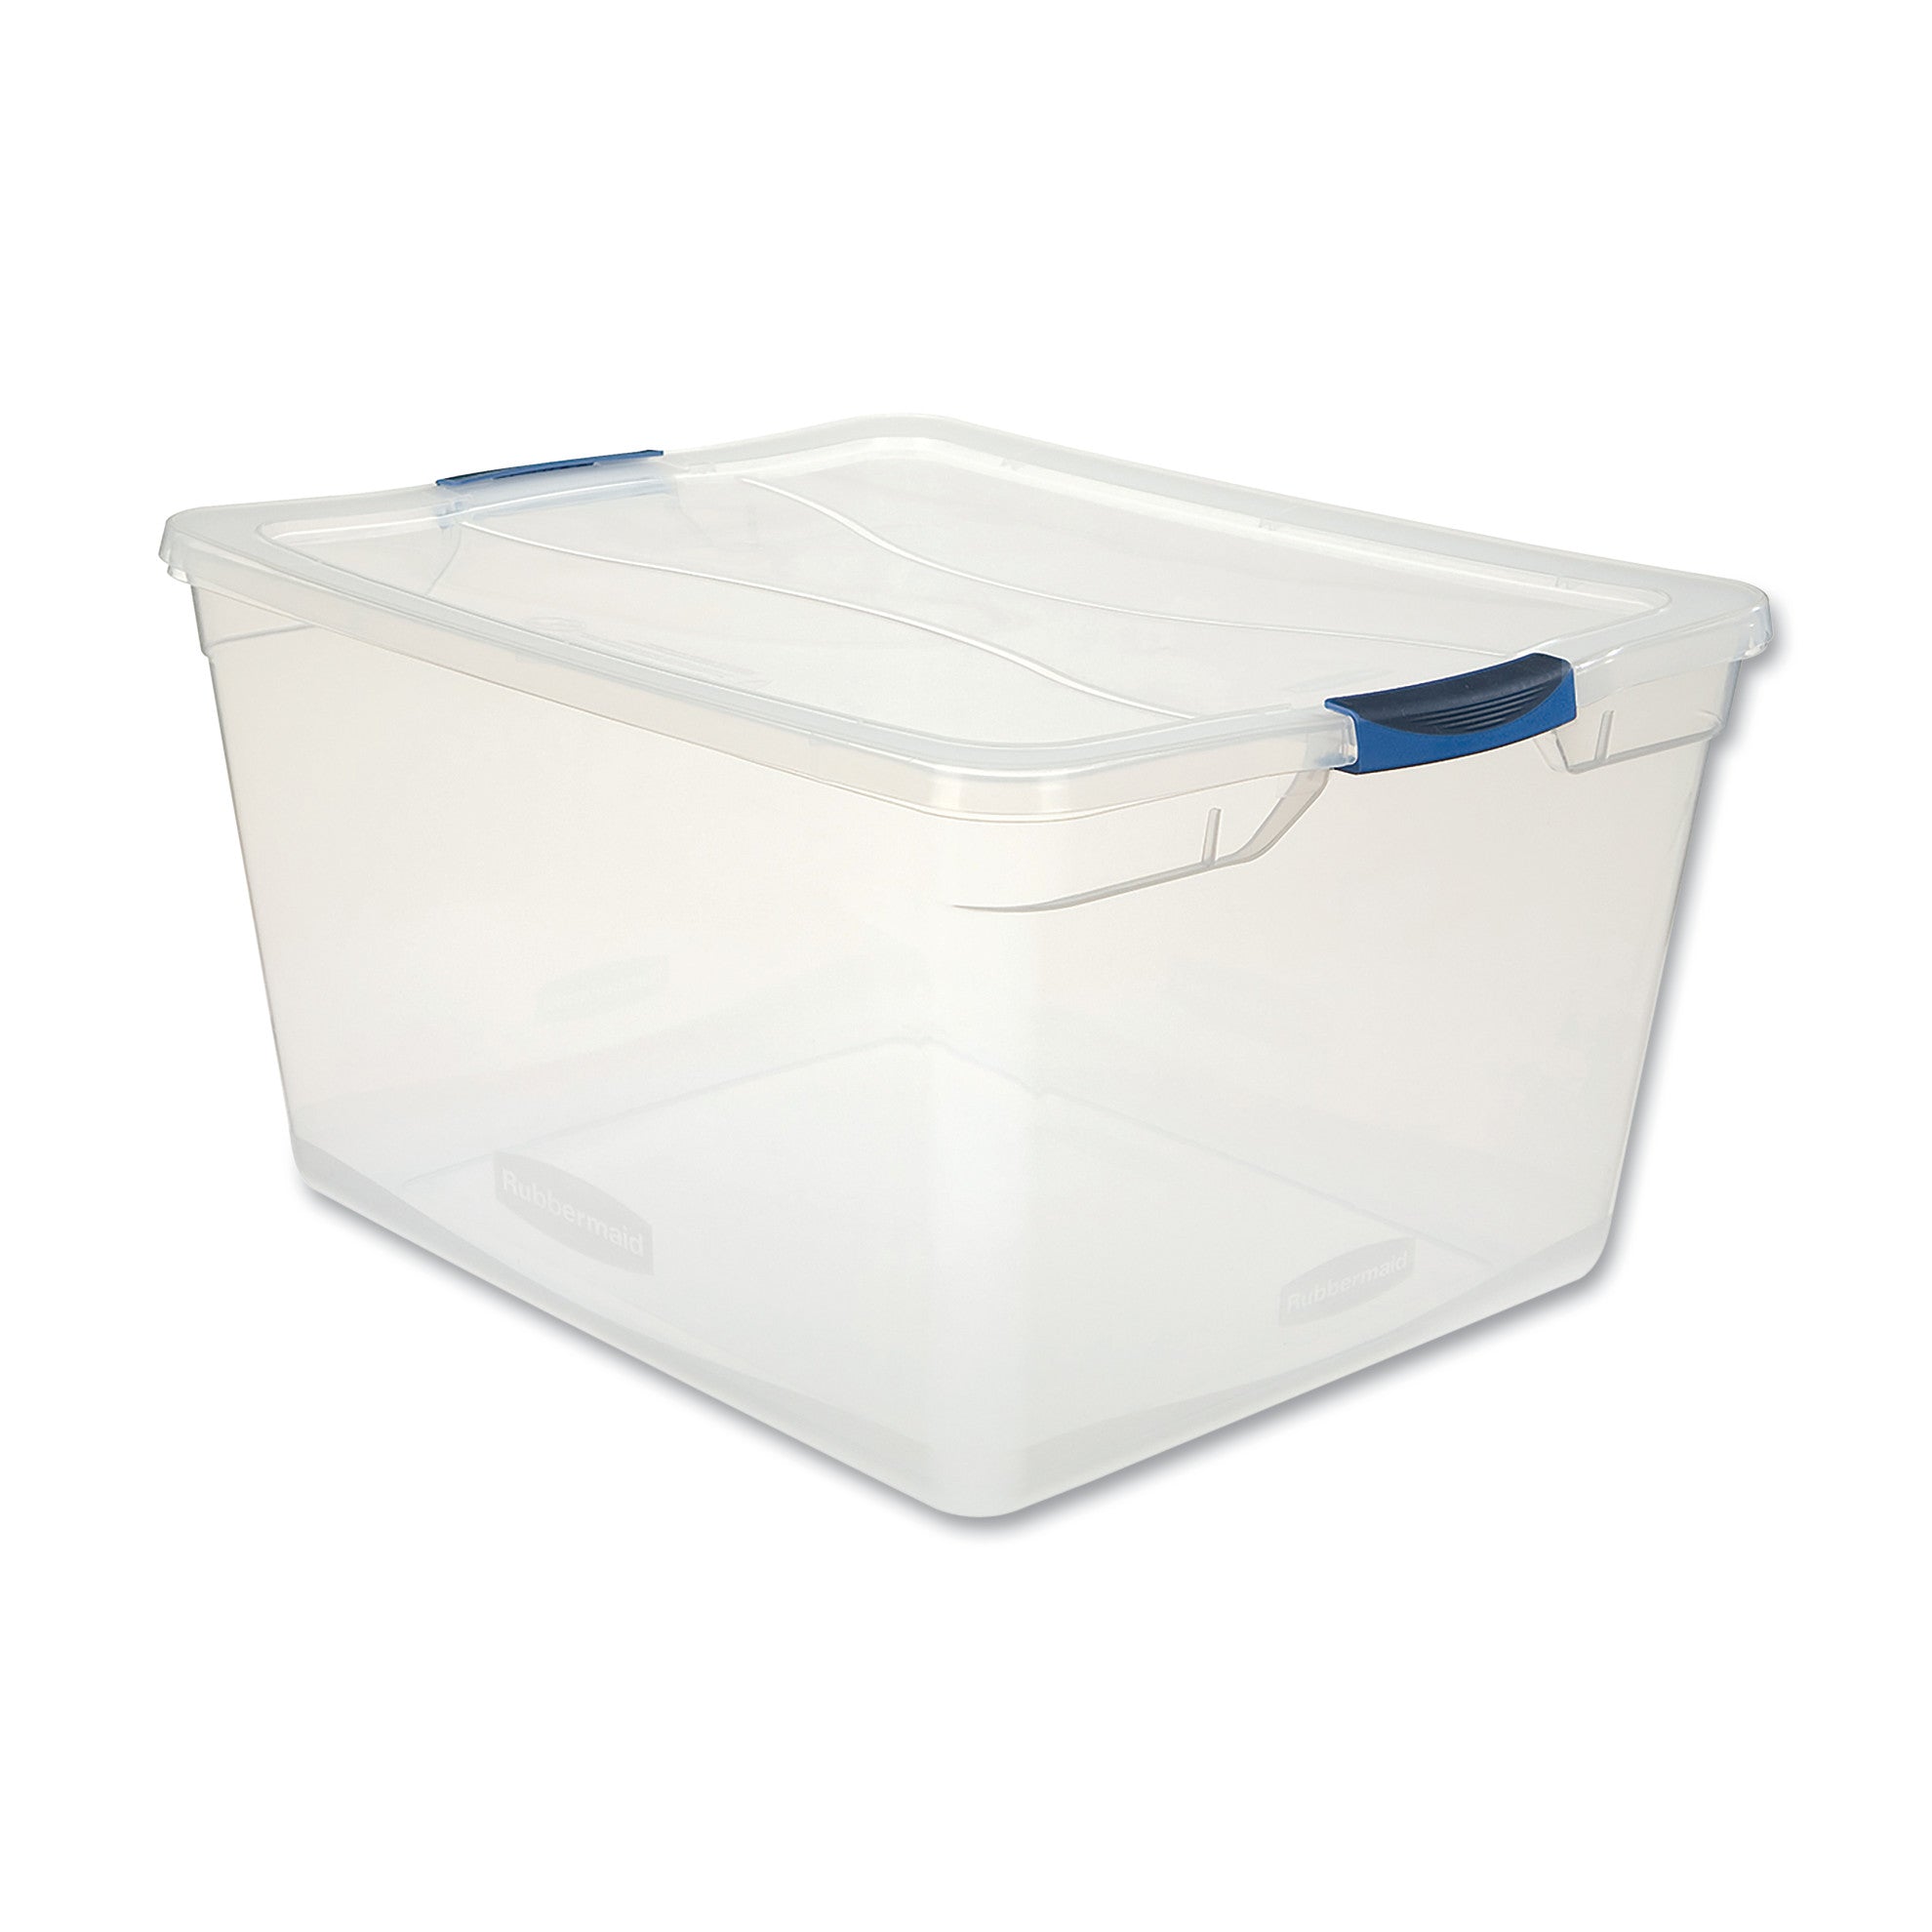 clever-store-basic-latch-lid-container-71-qt-1863-x-235-x-1225-clear_unxrmcc710000 - 1